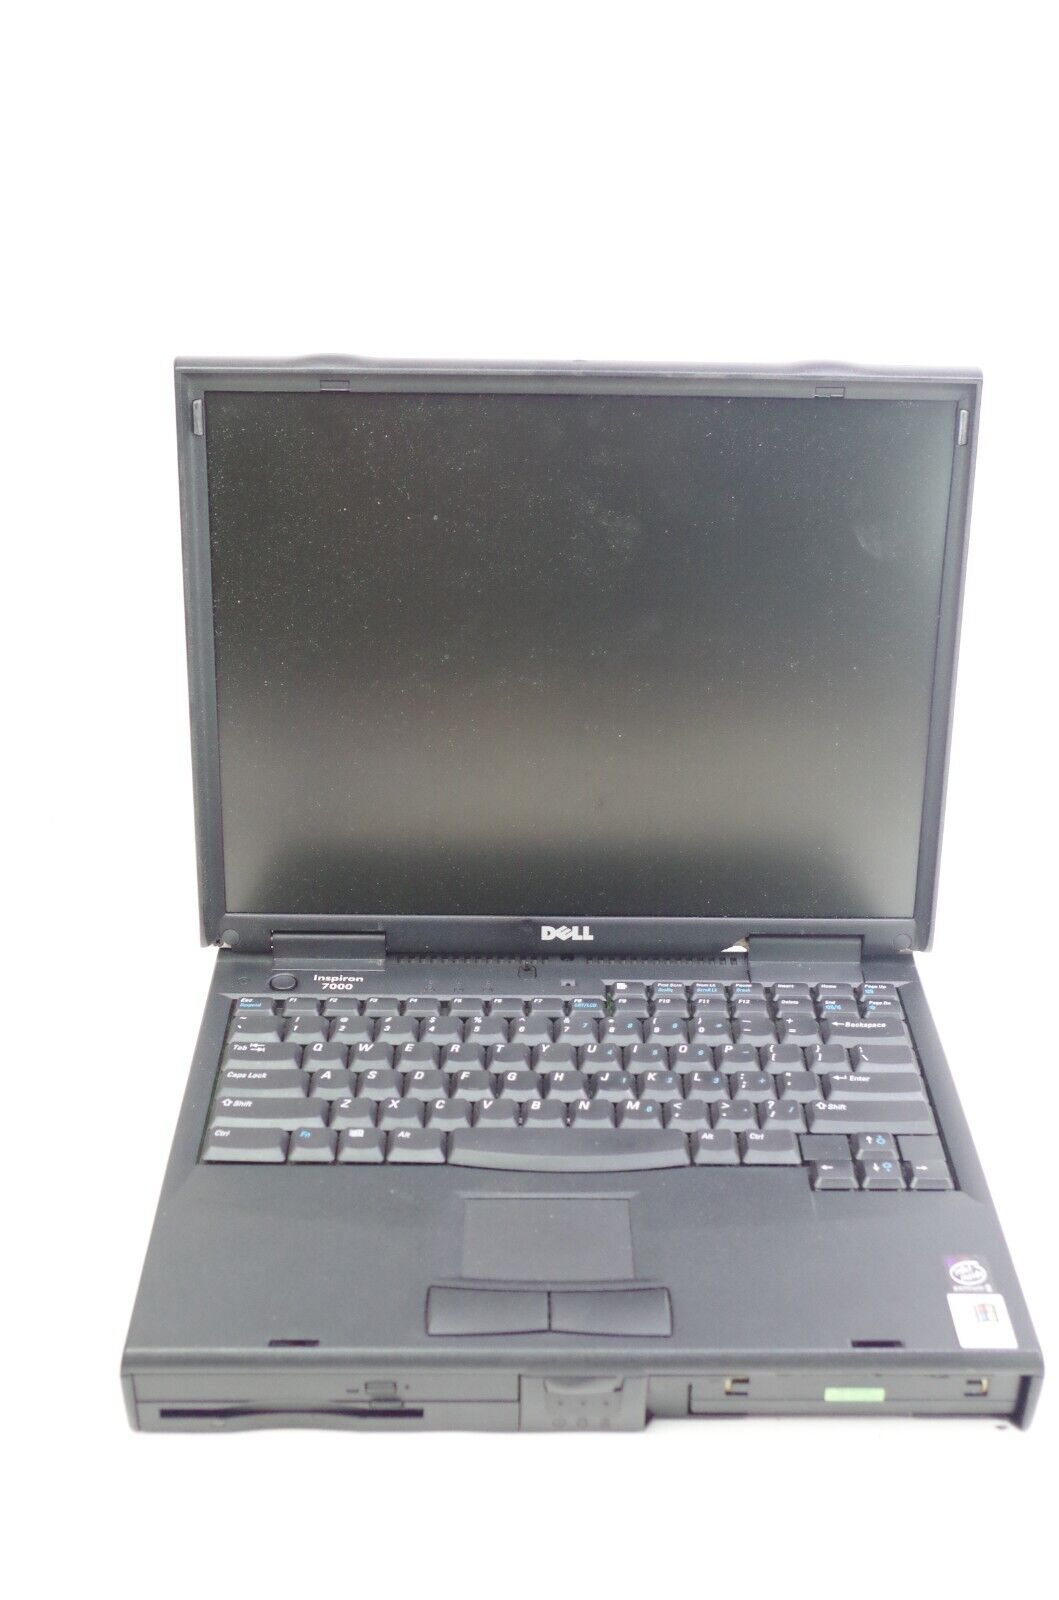 Vintage Dell Inspiron 7000 Laptop For Parts Repair Boots To Bios No HD